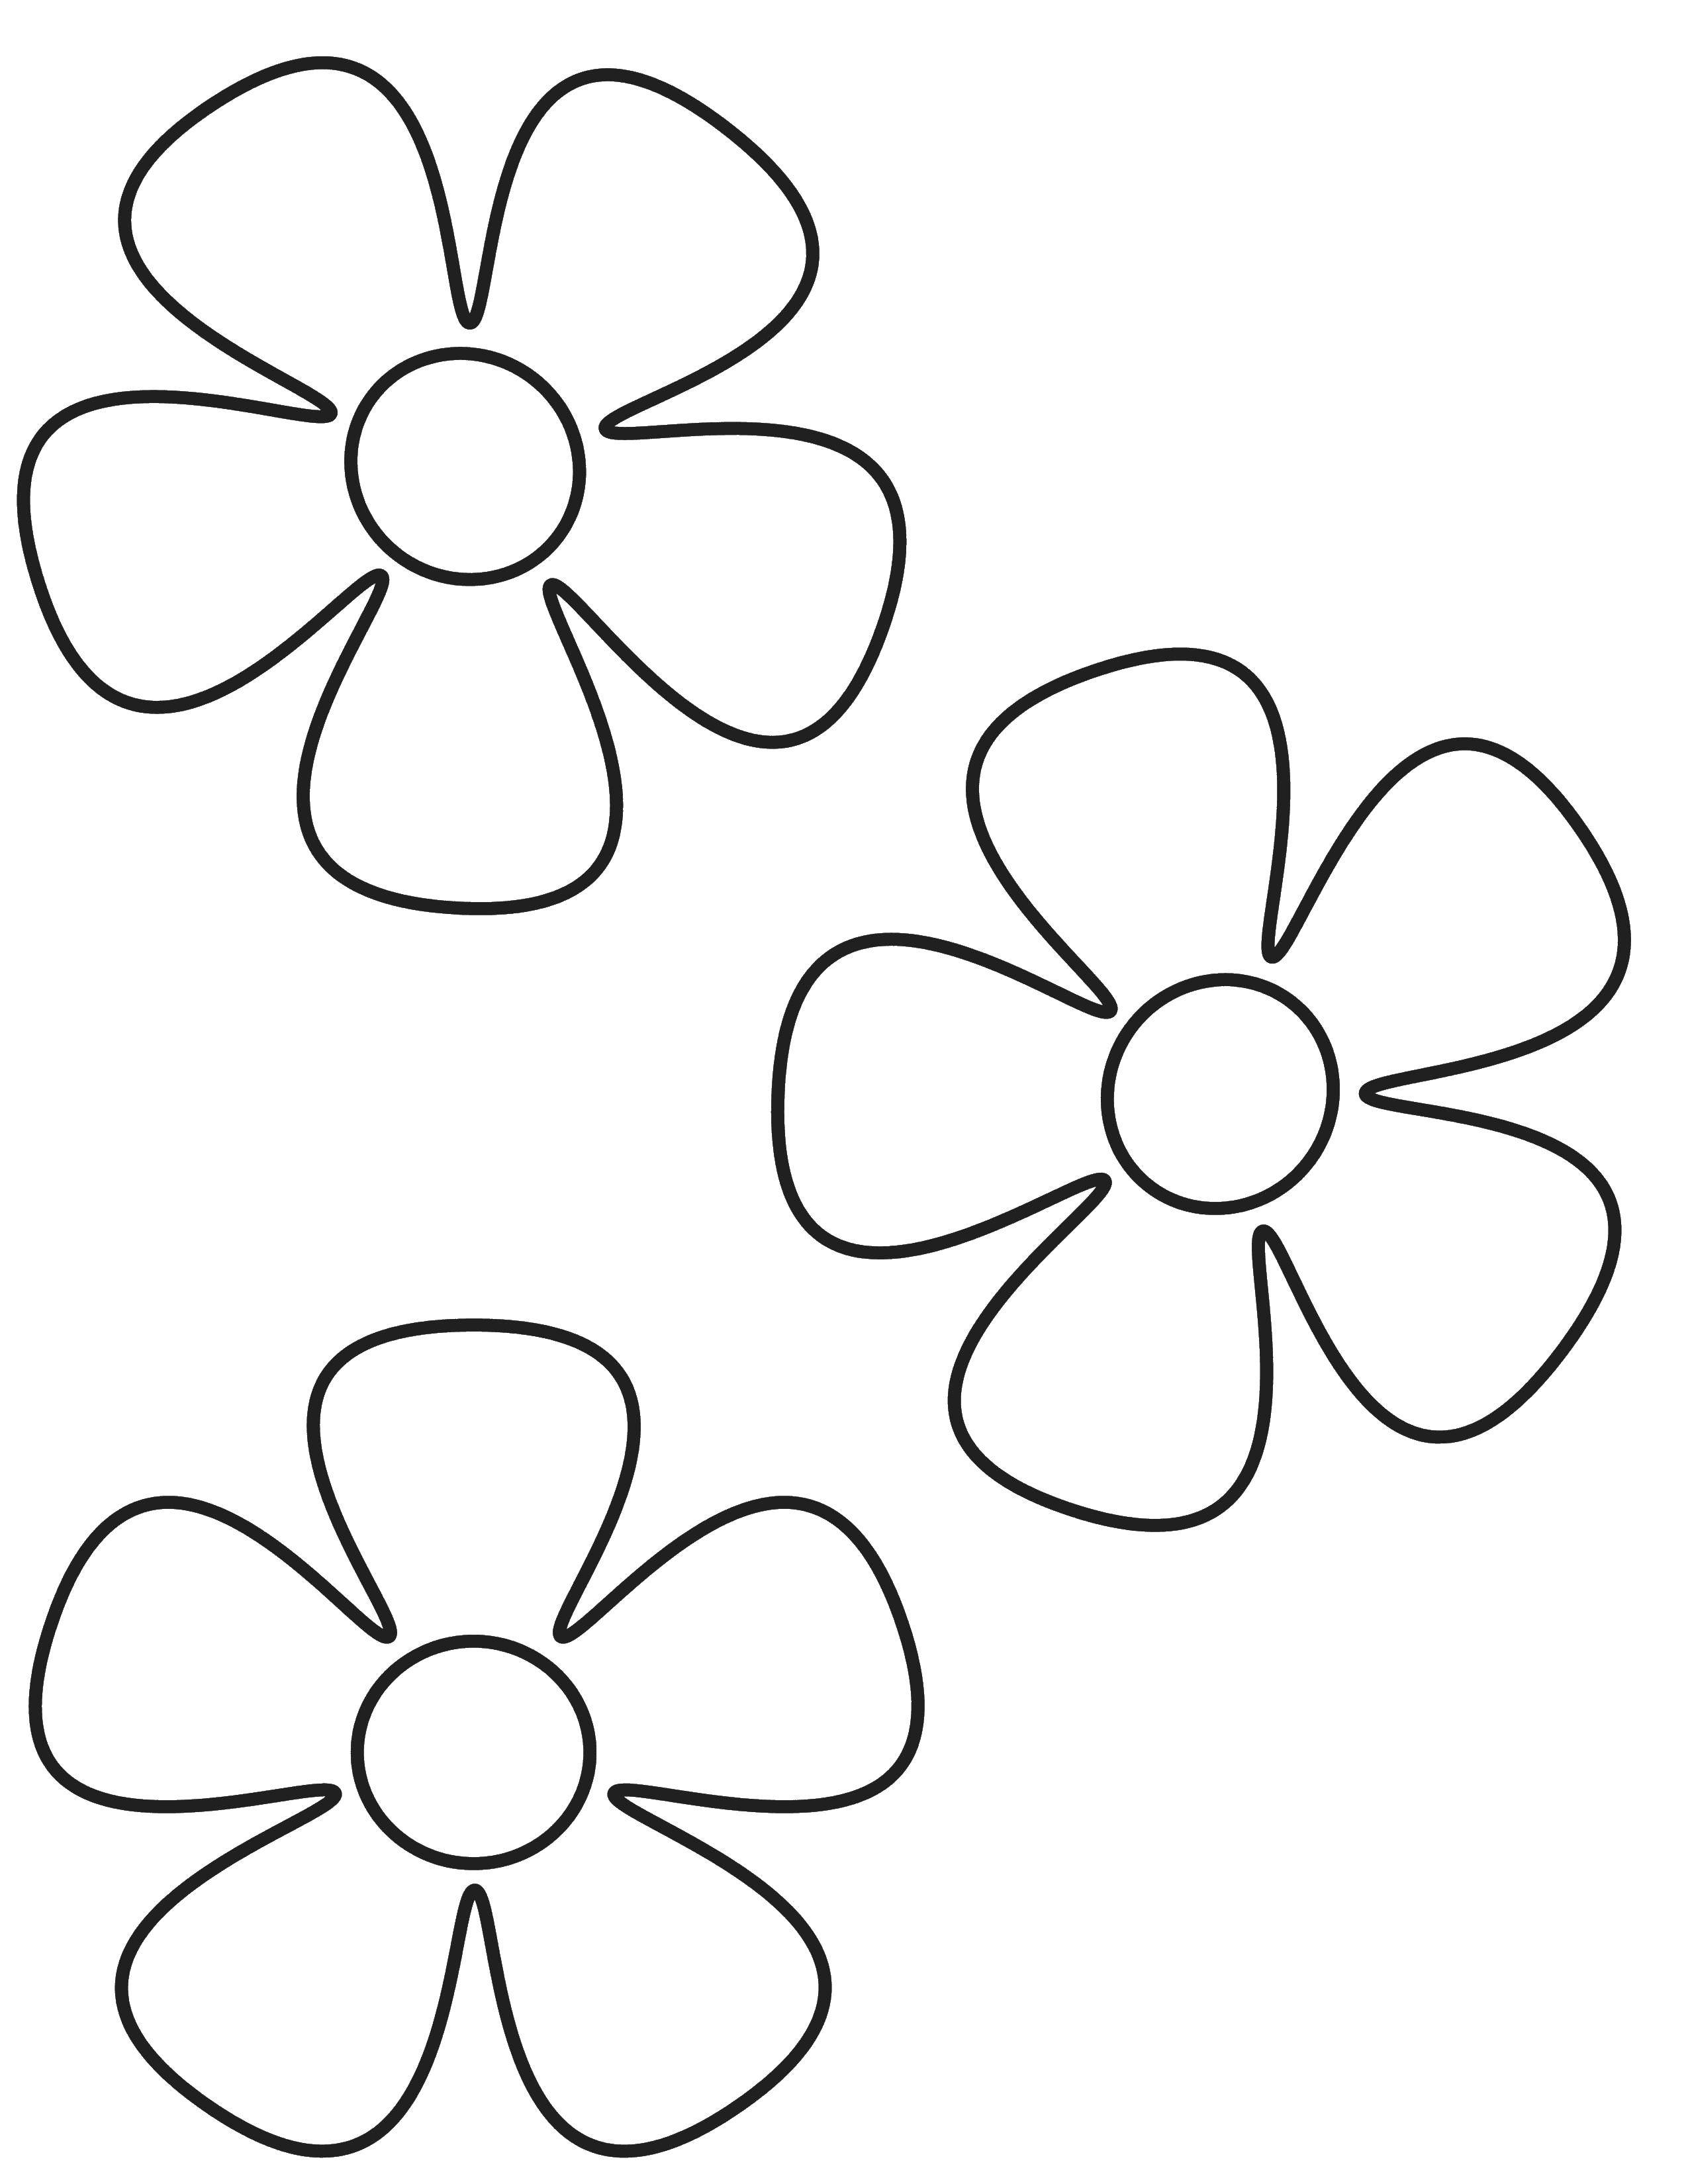 Coloring Three flowers. Category Flowers. Tags:  flowers, petals.